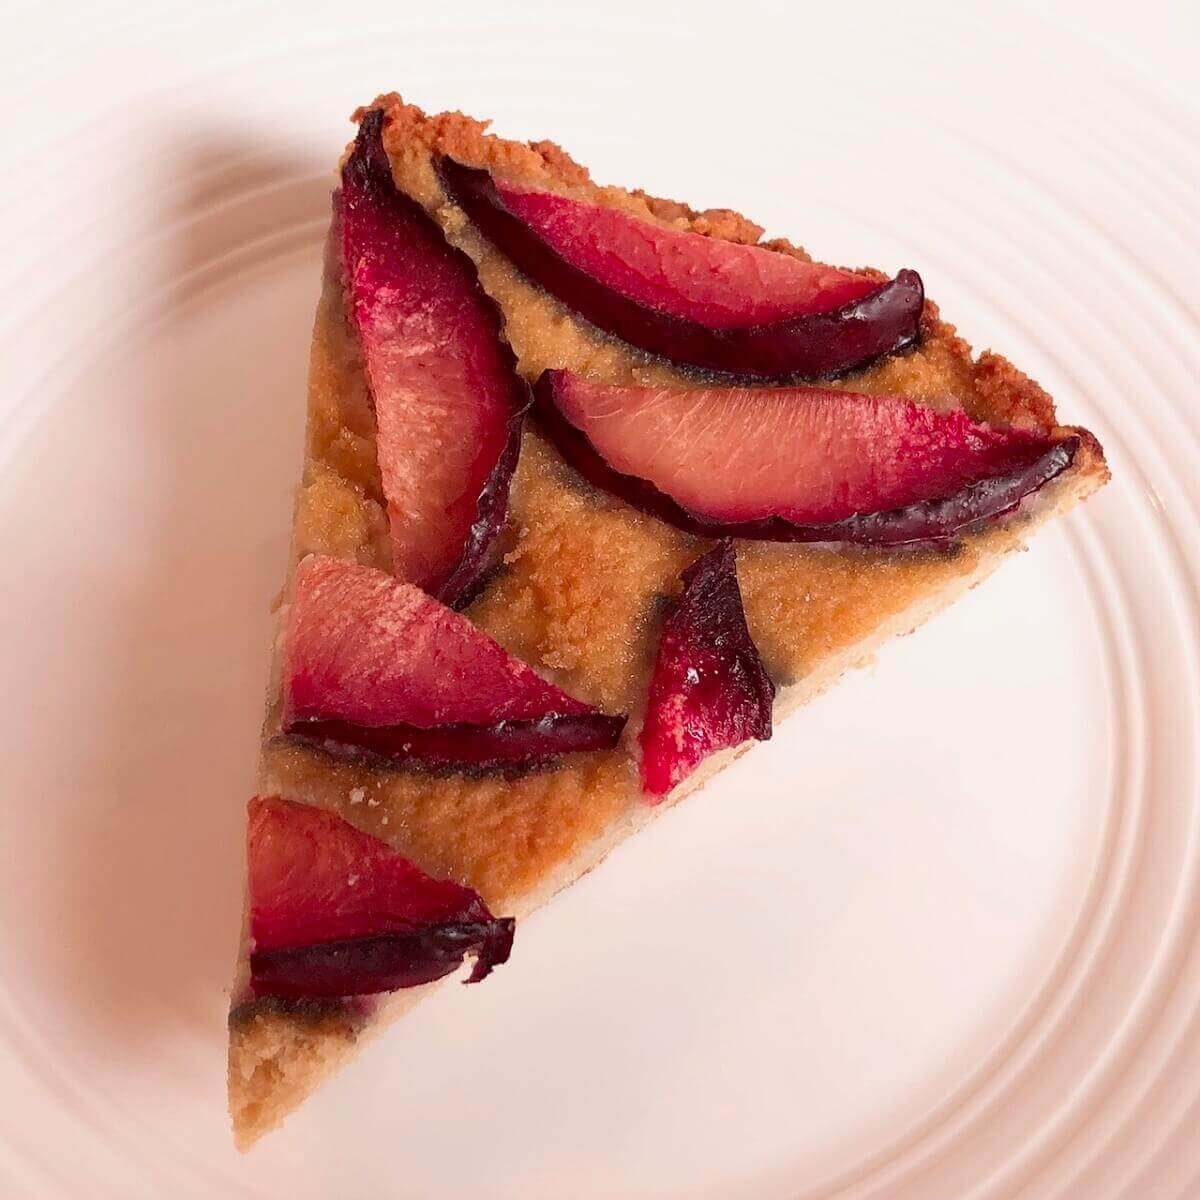 A piece of paleo plum cake with sliced plums on top.